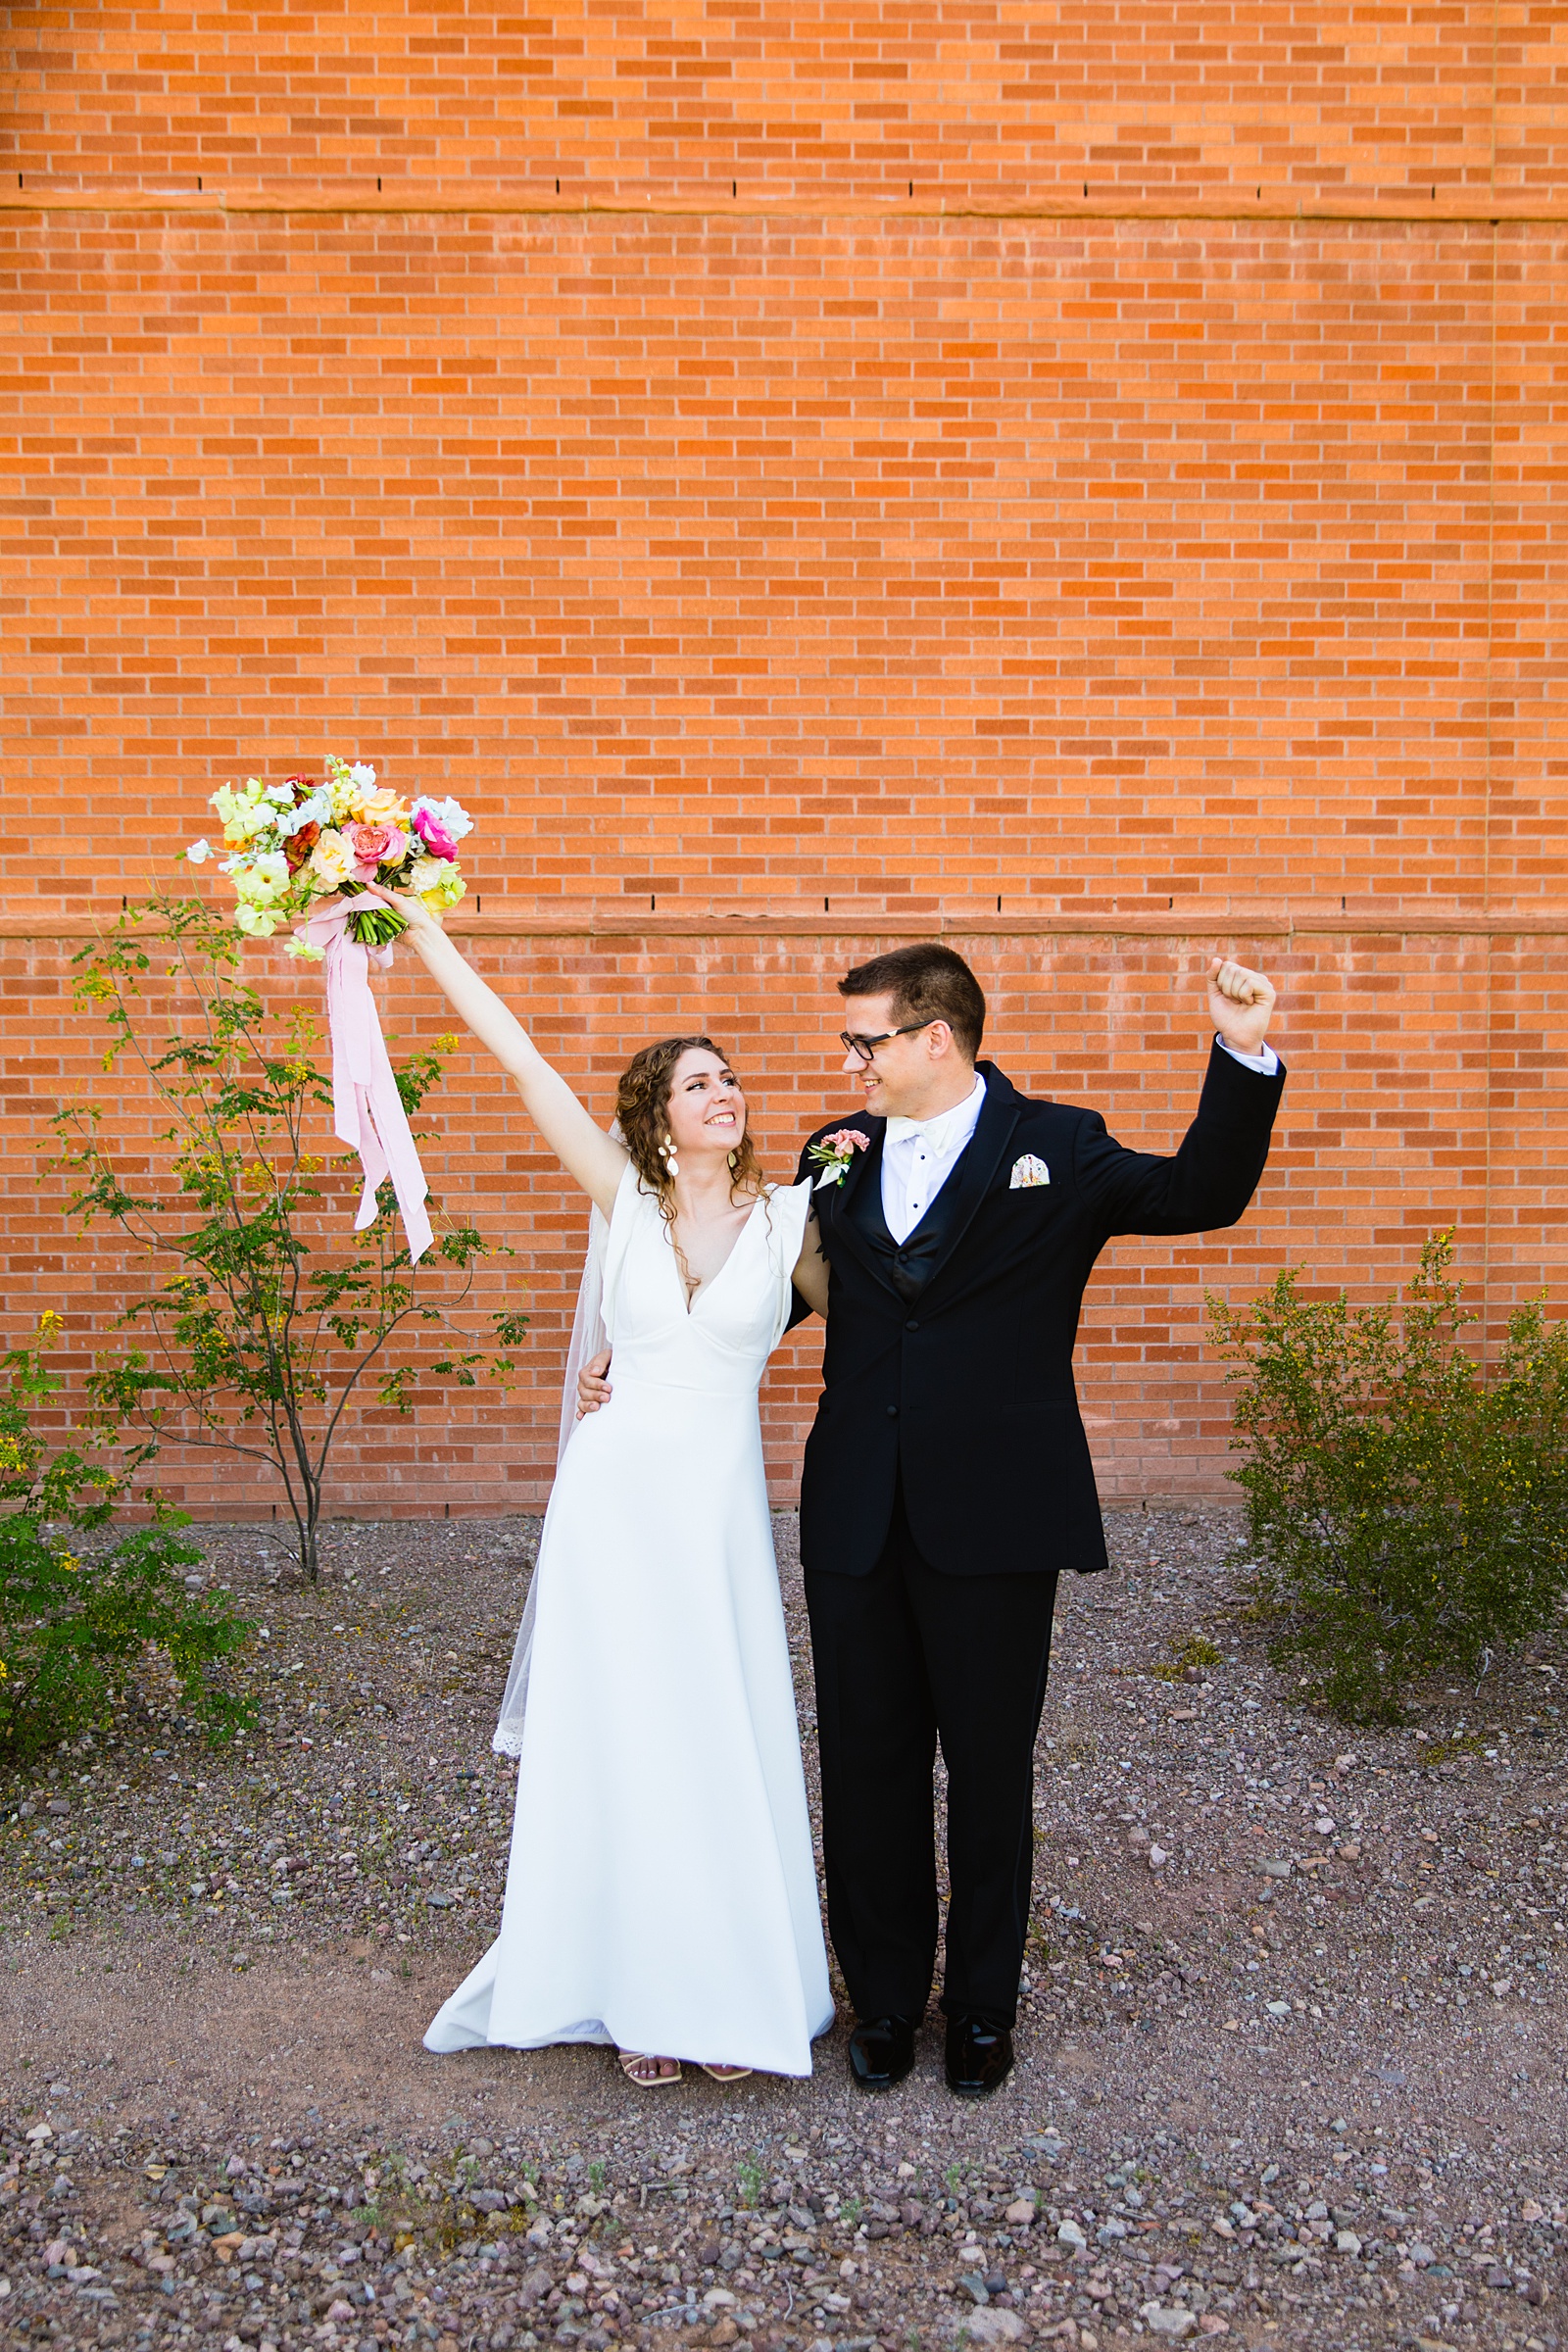 Bride and groom having fun together during their Arizona Historical Society wedding by Tempe wedding photographer PMA Photography.